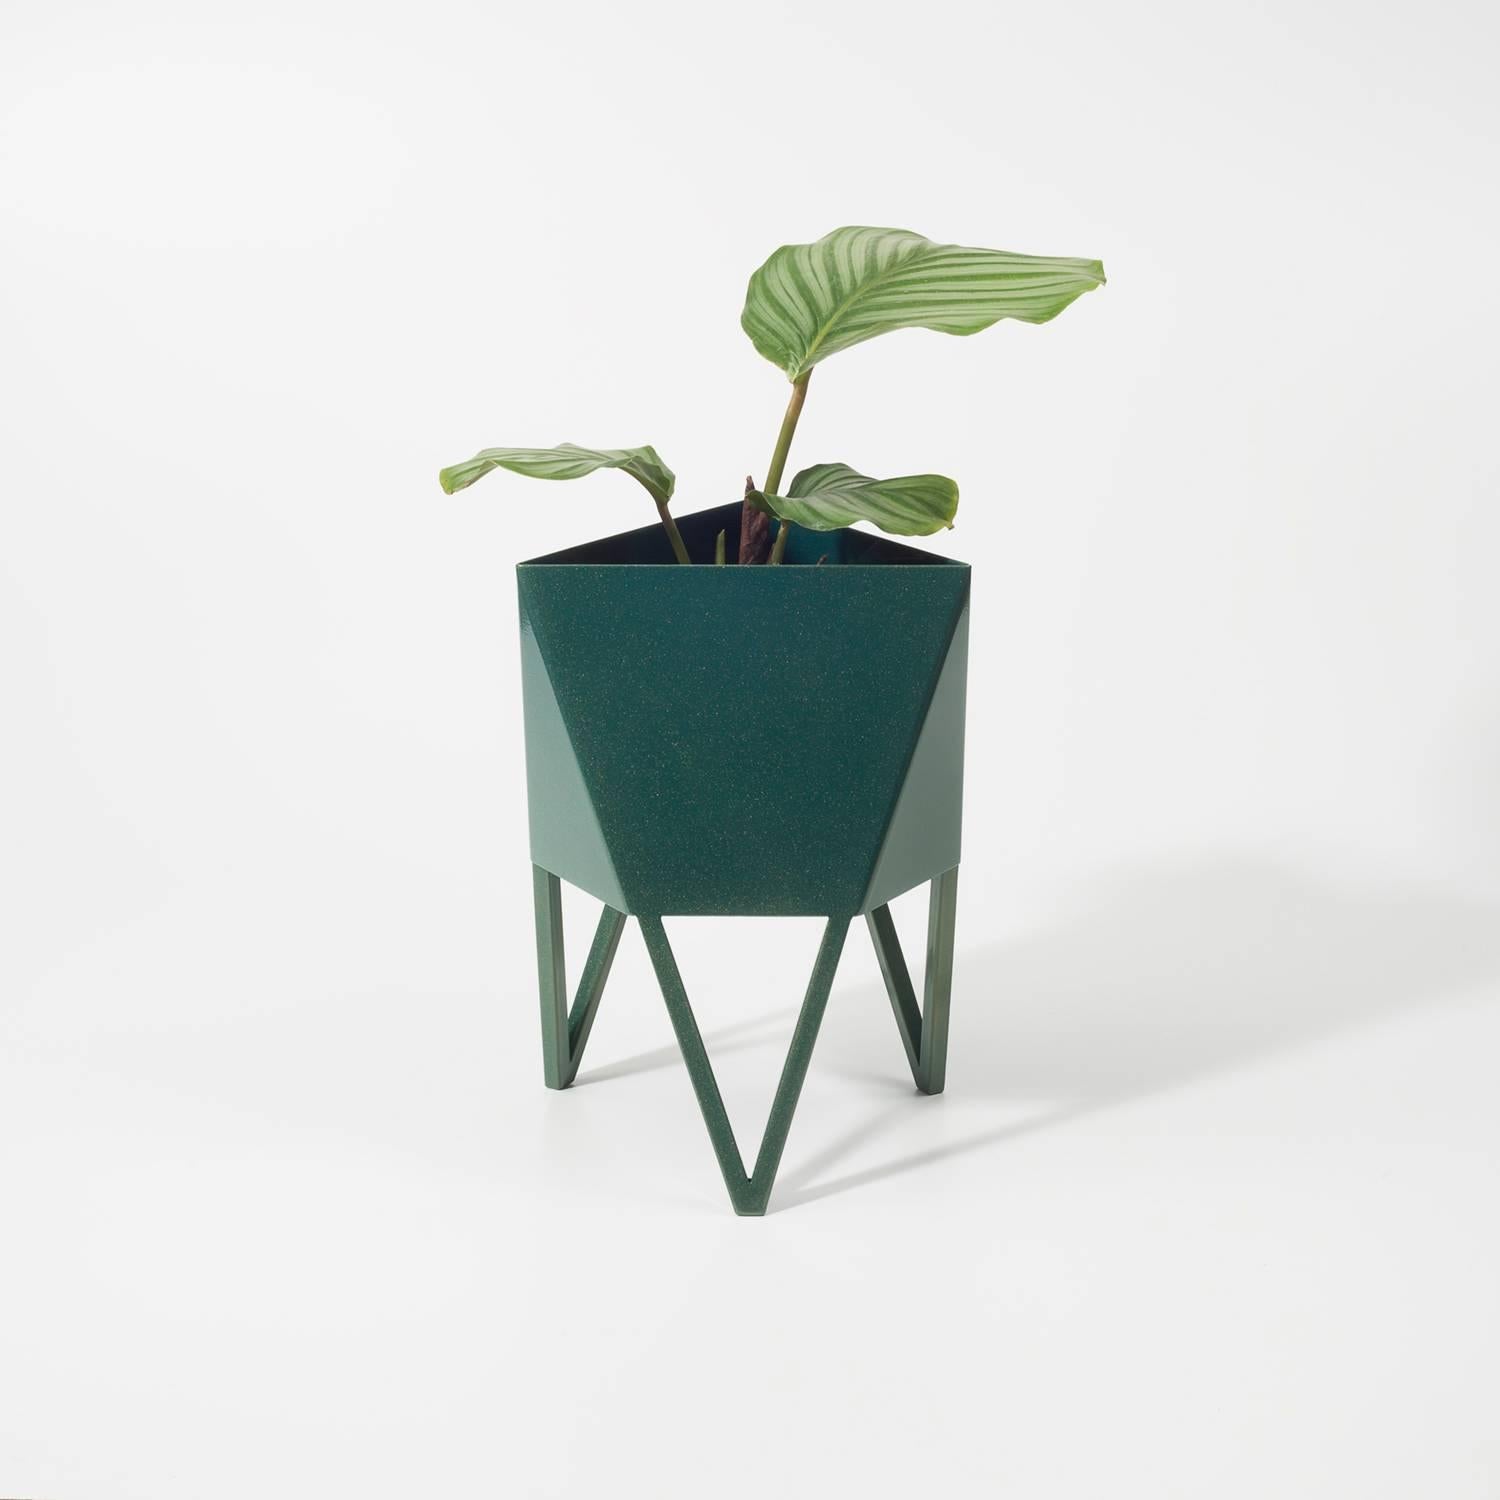 Contemporary Deca Planter in Pastel Green Steel, Mini, by Force/Collide